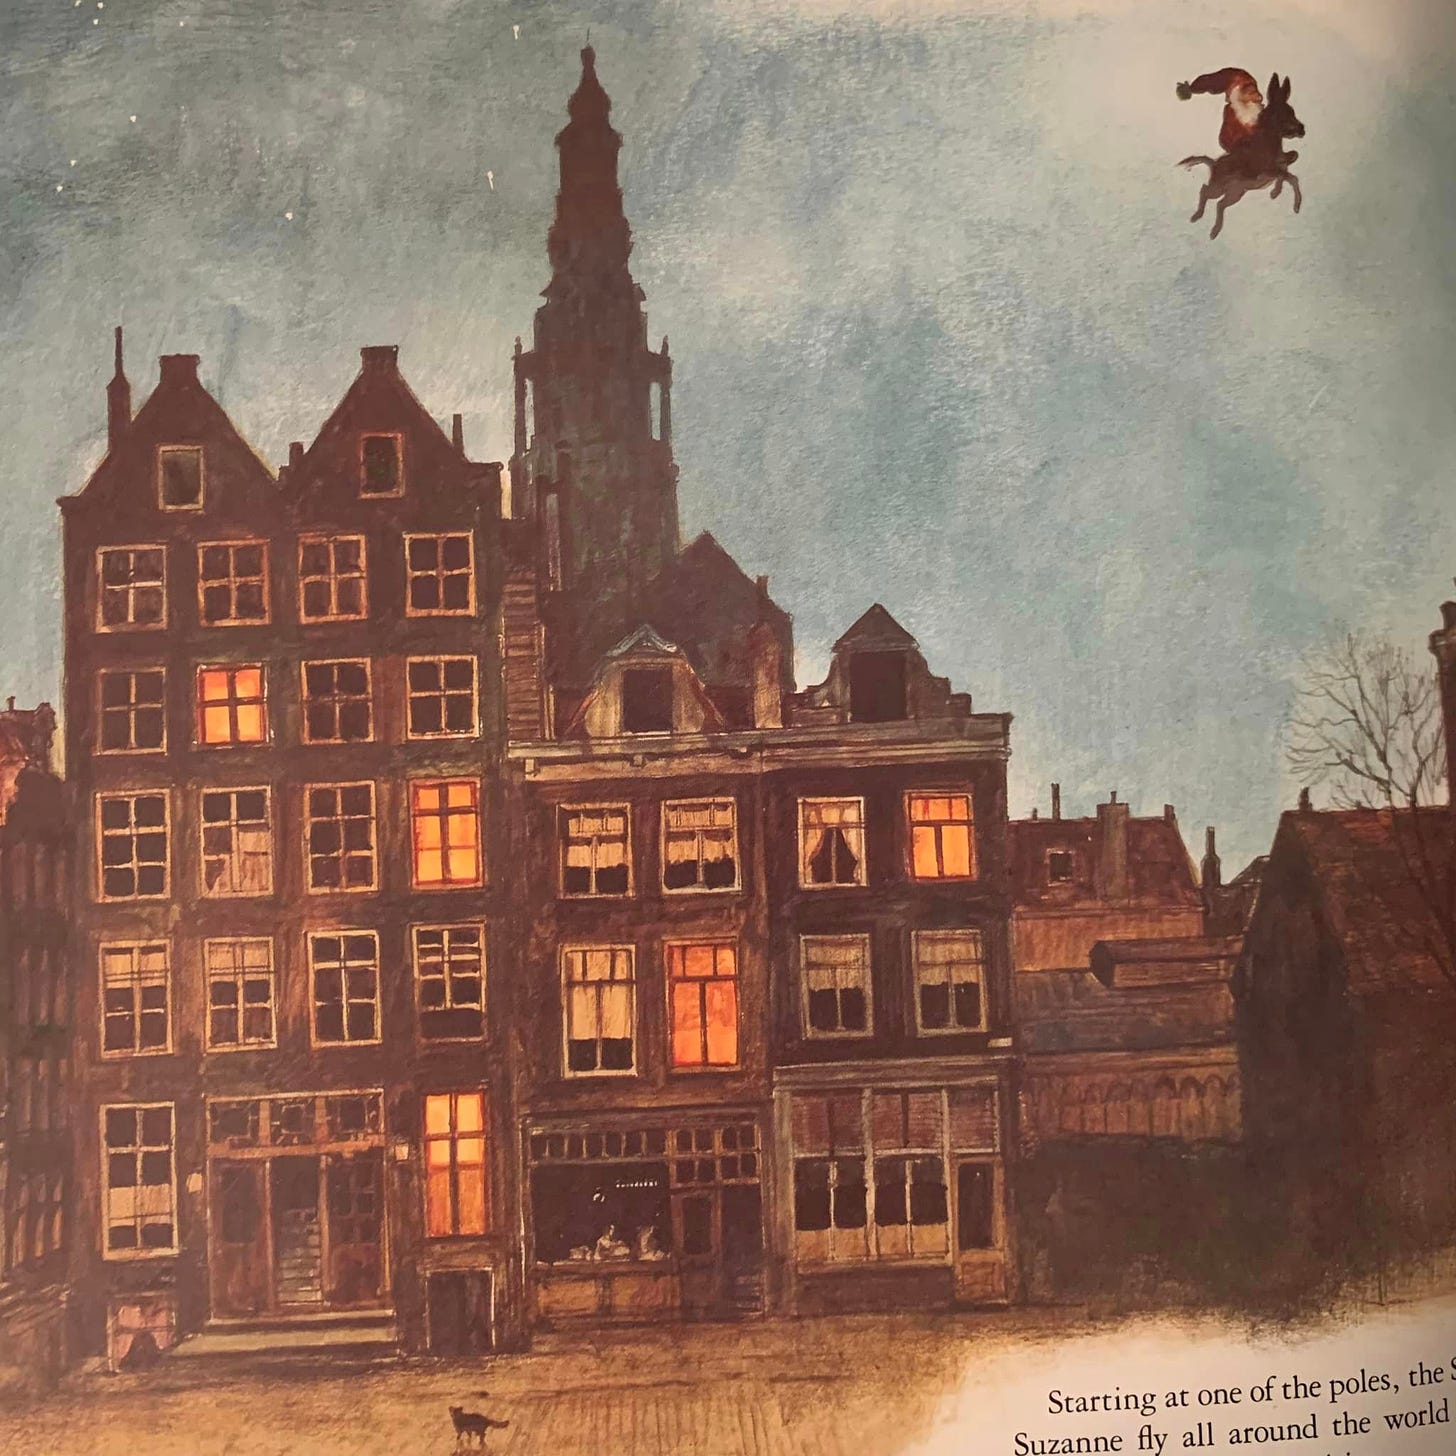 May be an image of Rijksmuseum